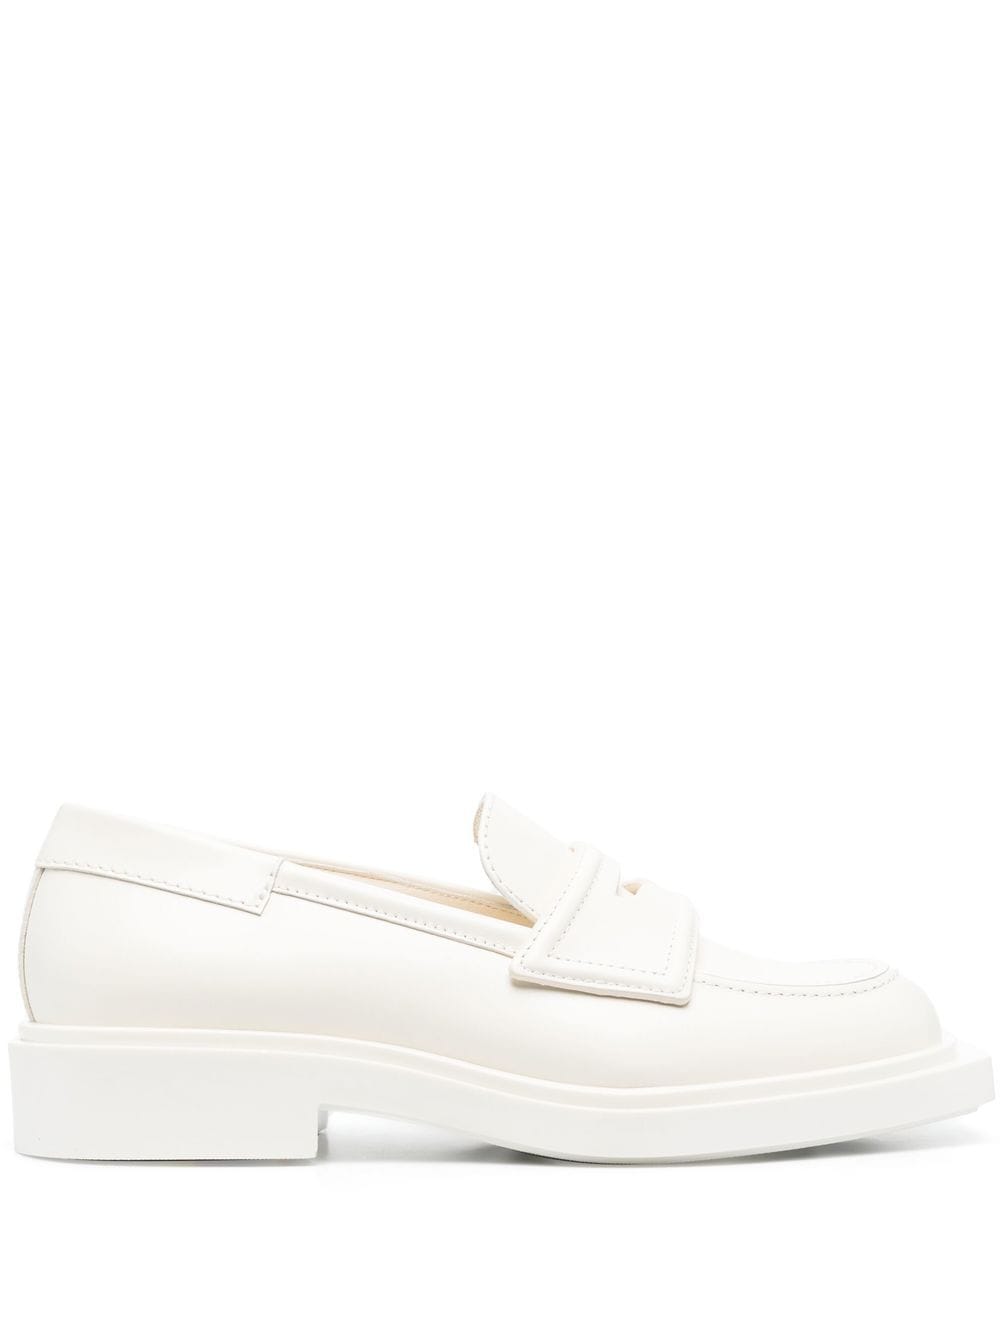 tonal leather loafers